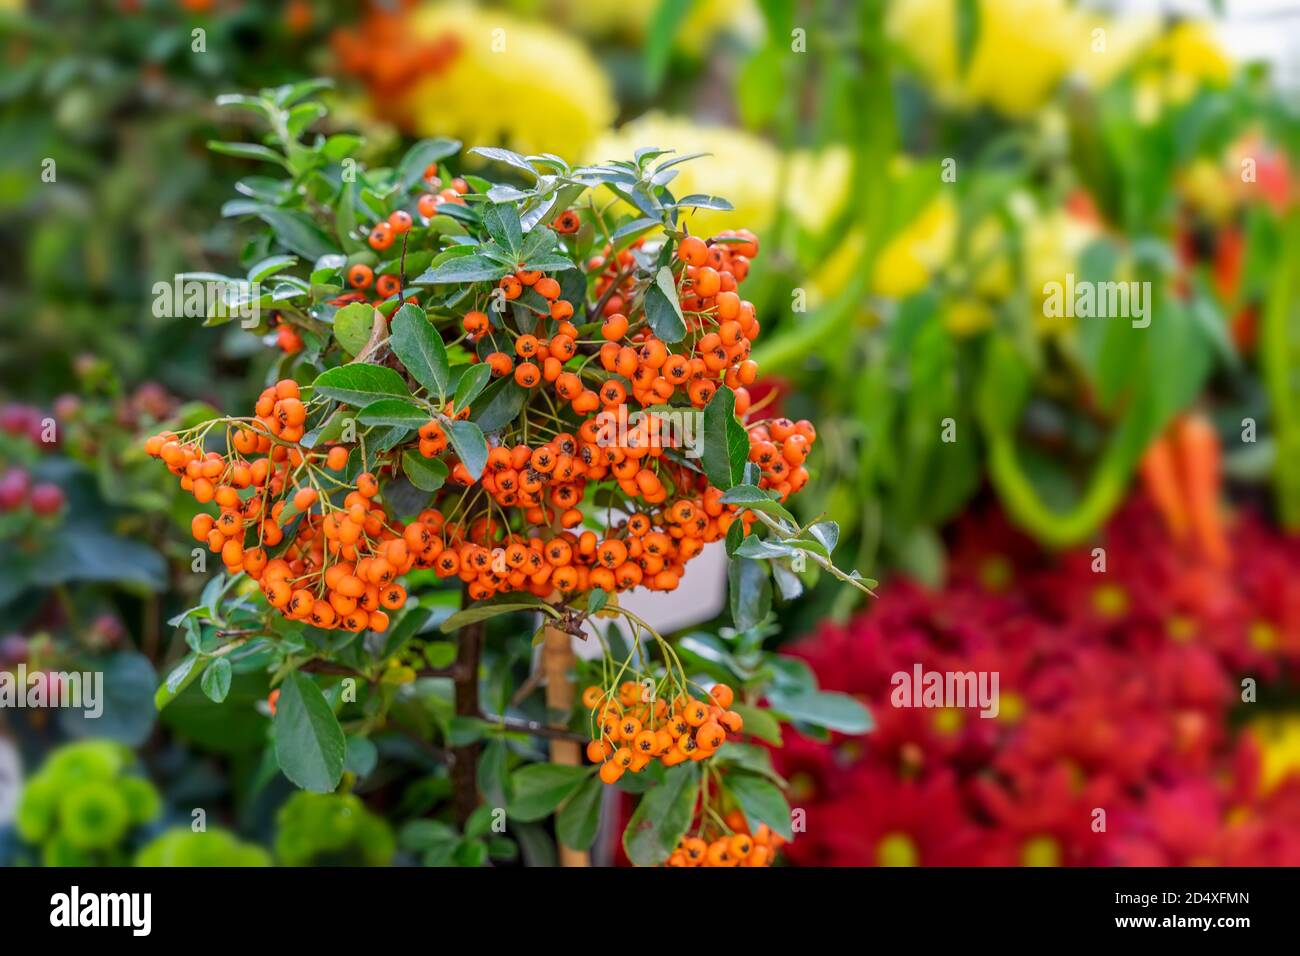 Ripe red berries of growing pyracantha in a flower pot close-up, sunny day. Autumn season, bright colorful background Stock Photo